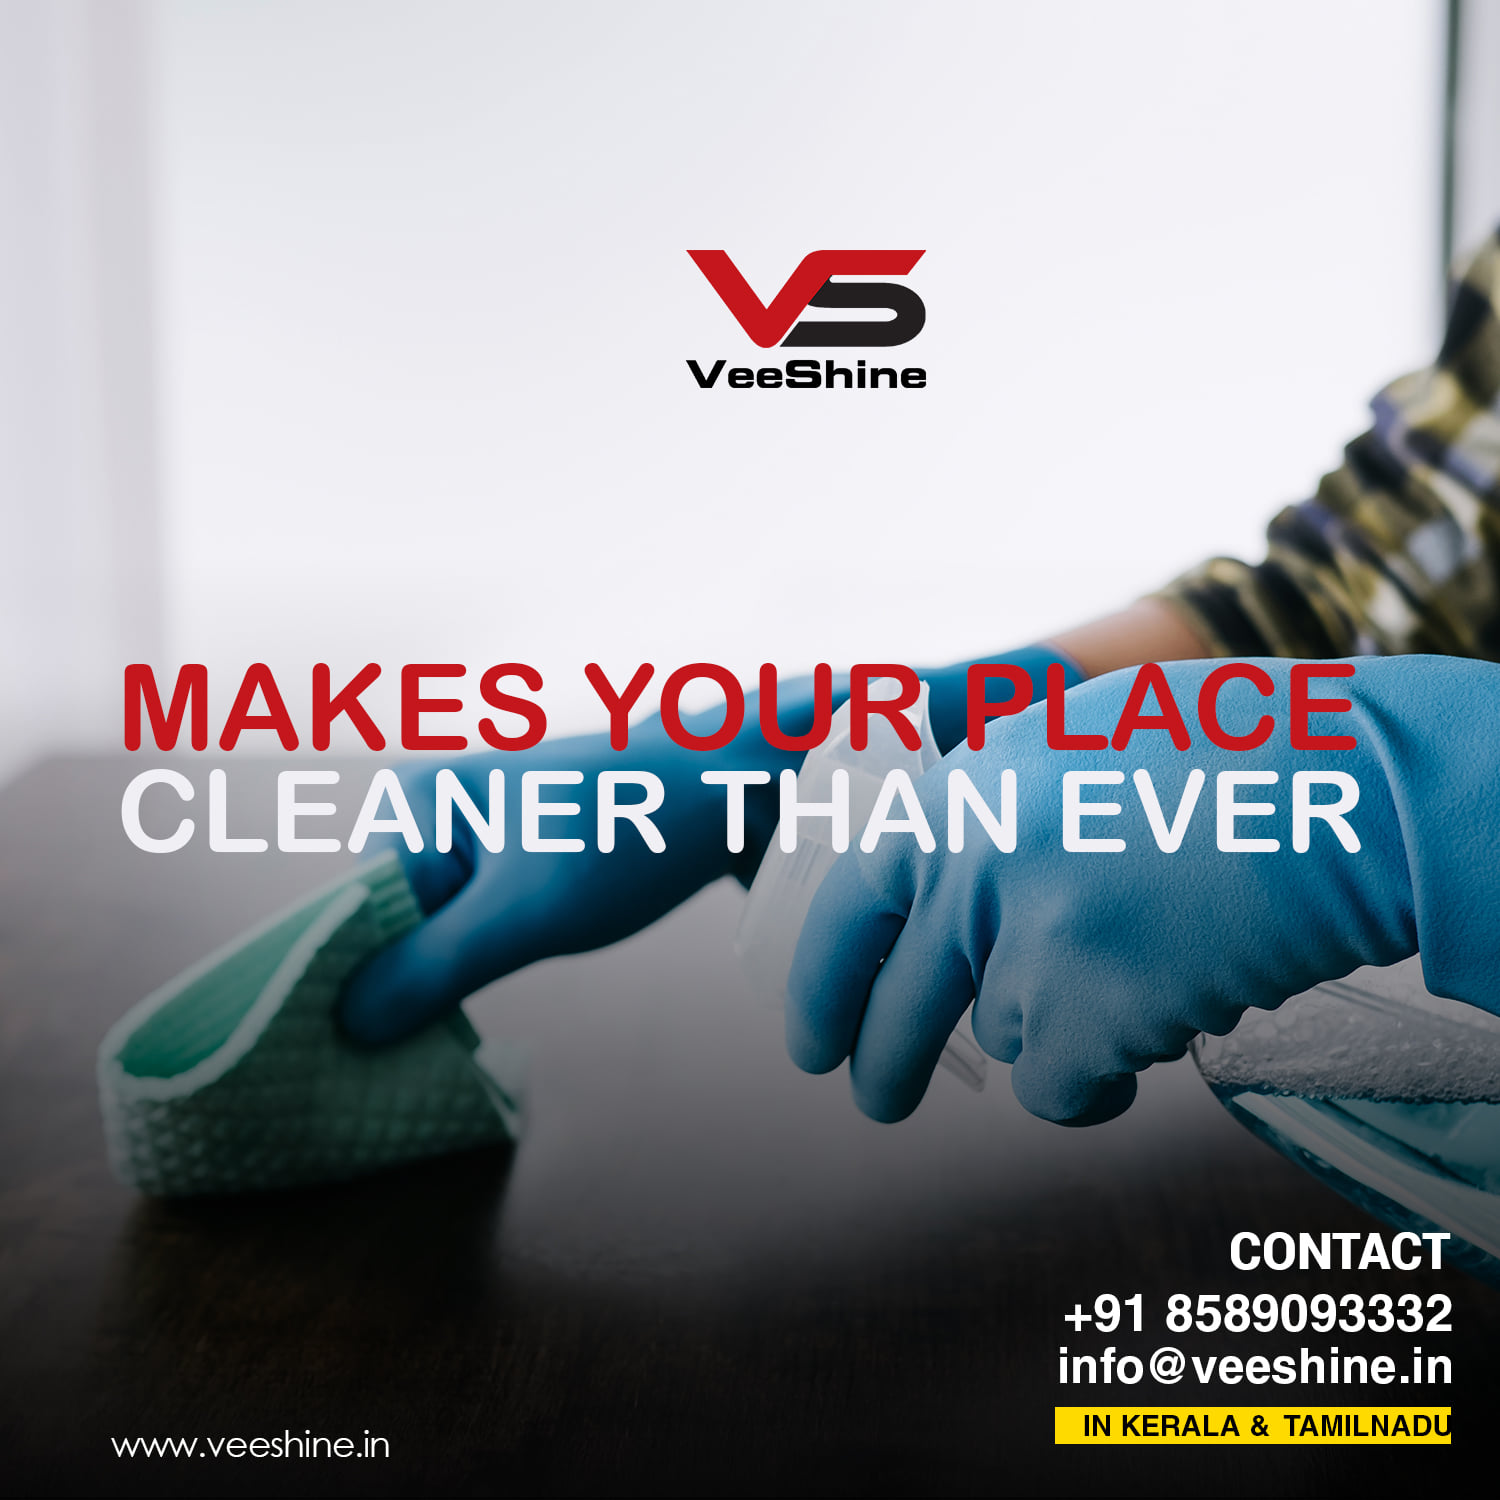 VeeShine Housekeeping and cleaning service in Kochi